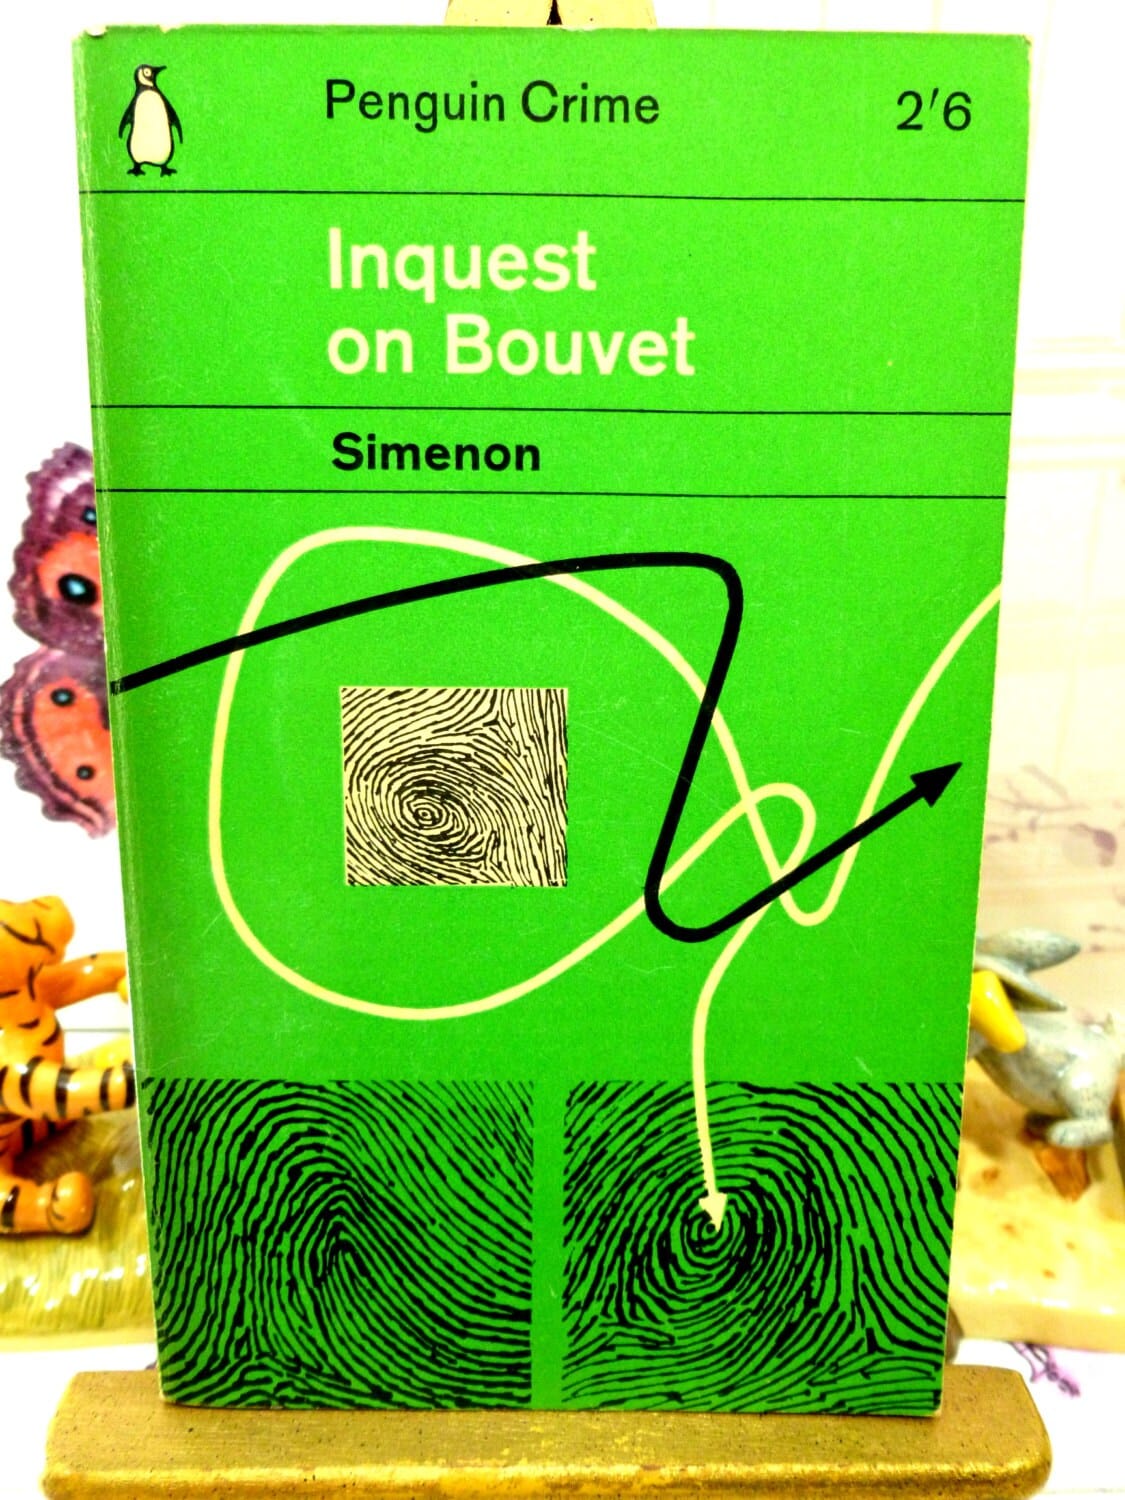 Front cover of Vintage Penguin Paperback book Inspector Maigret Inquest on Bouvet by Georges Simenon Crime Fiction with abstract thumbprint design on green ground. 